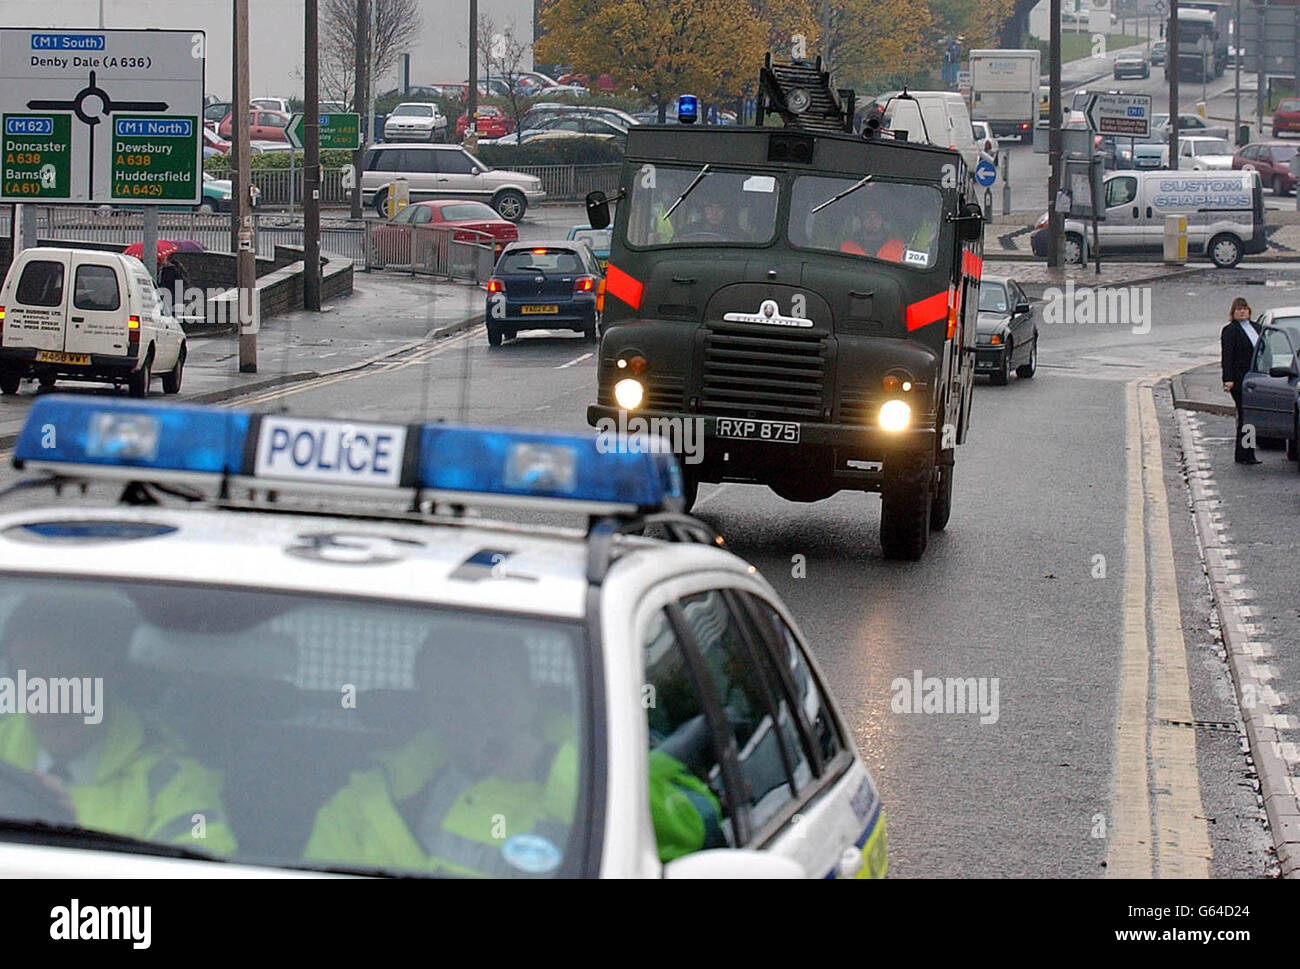 A Green Goddess is escorted by a Police car out on the road in Wakefield, ahead of the national strike by the Fire Brigades Union. Stock Photo